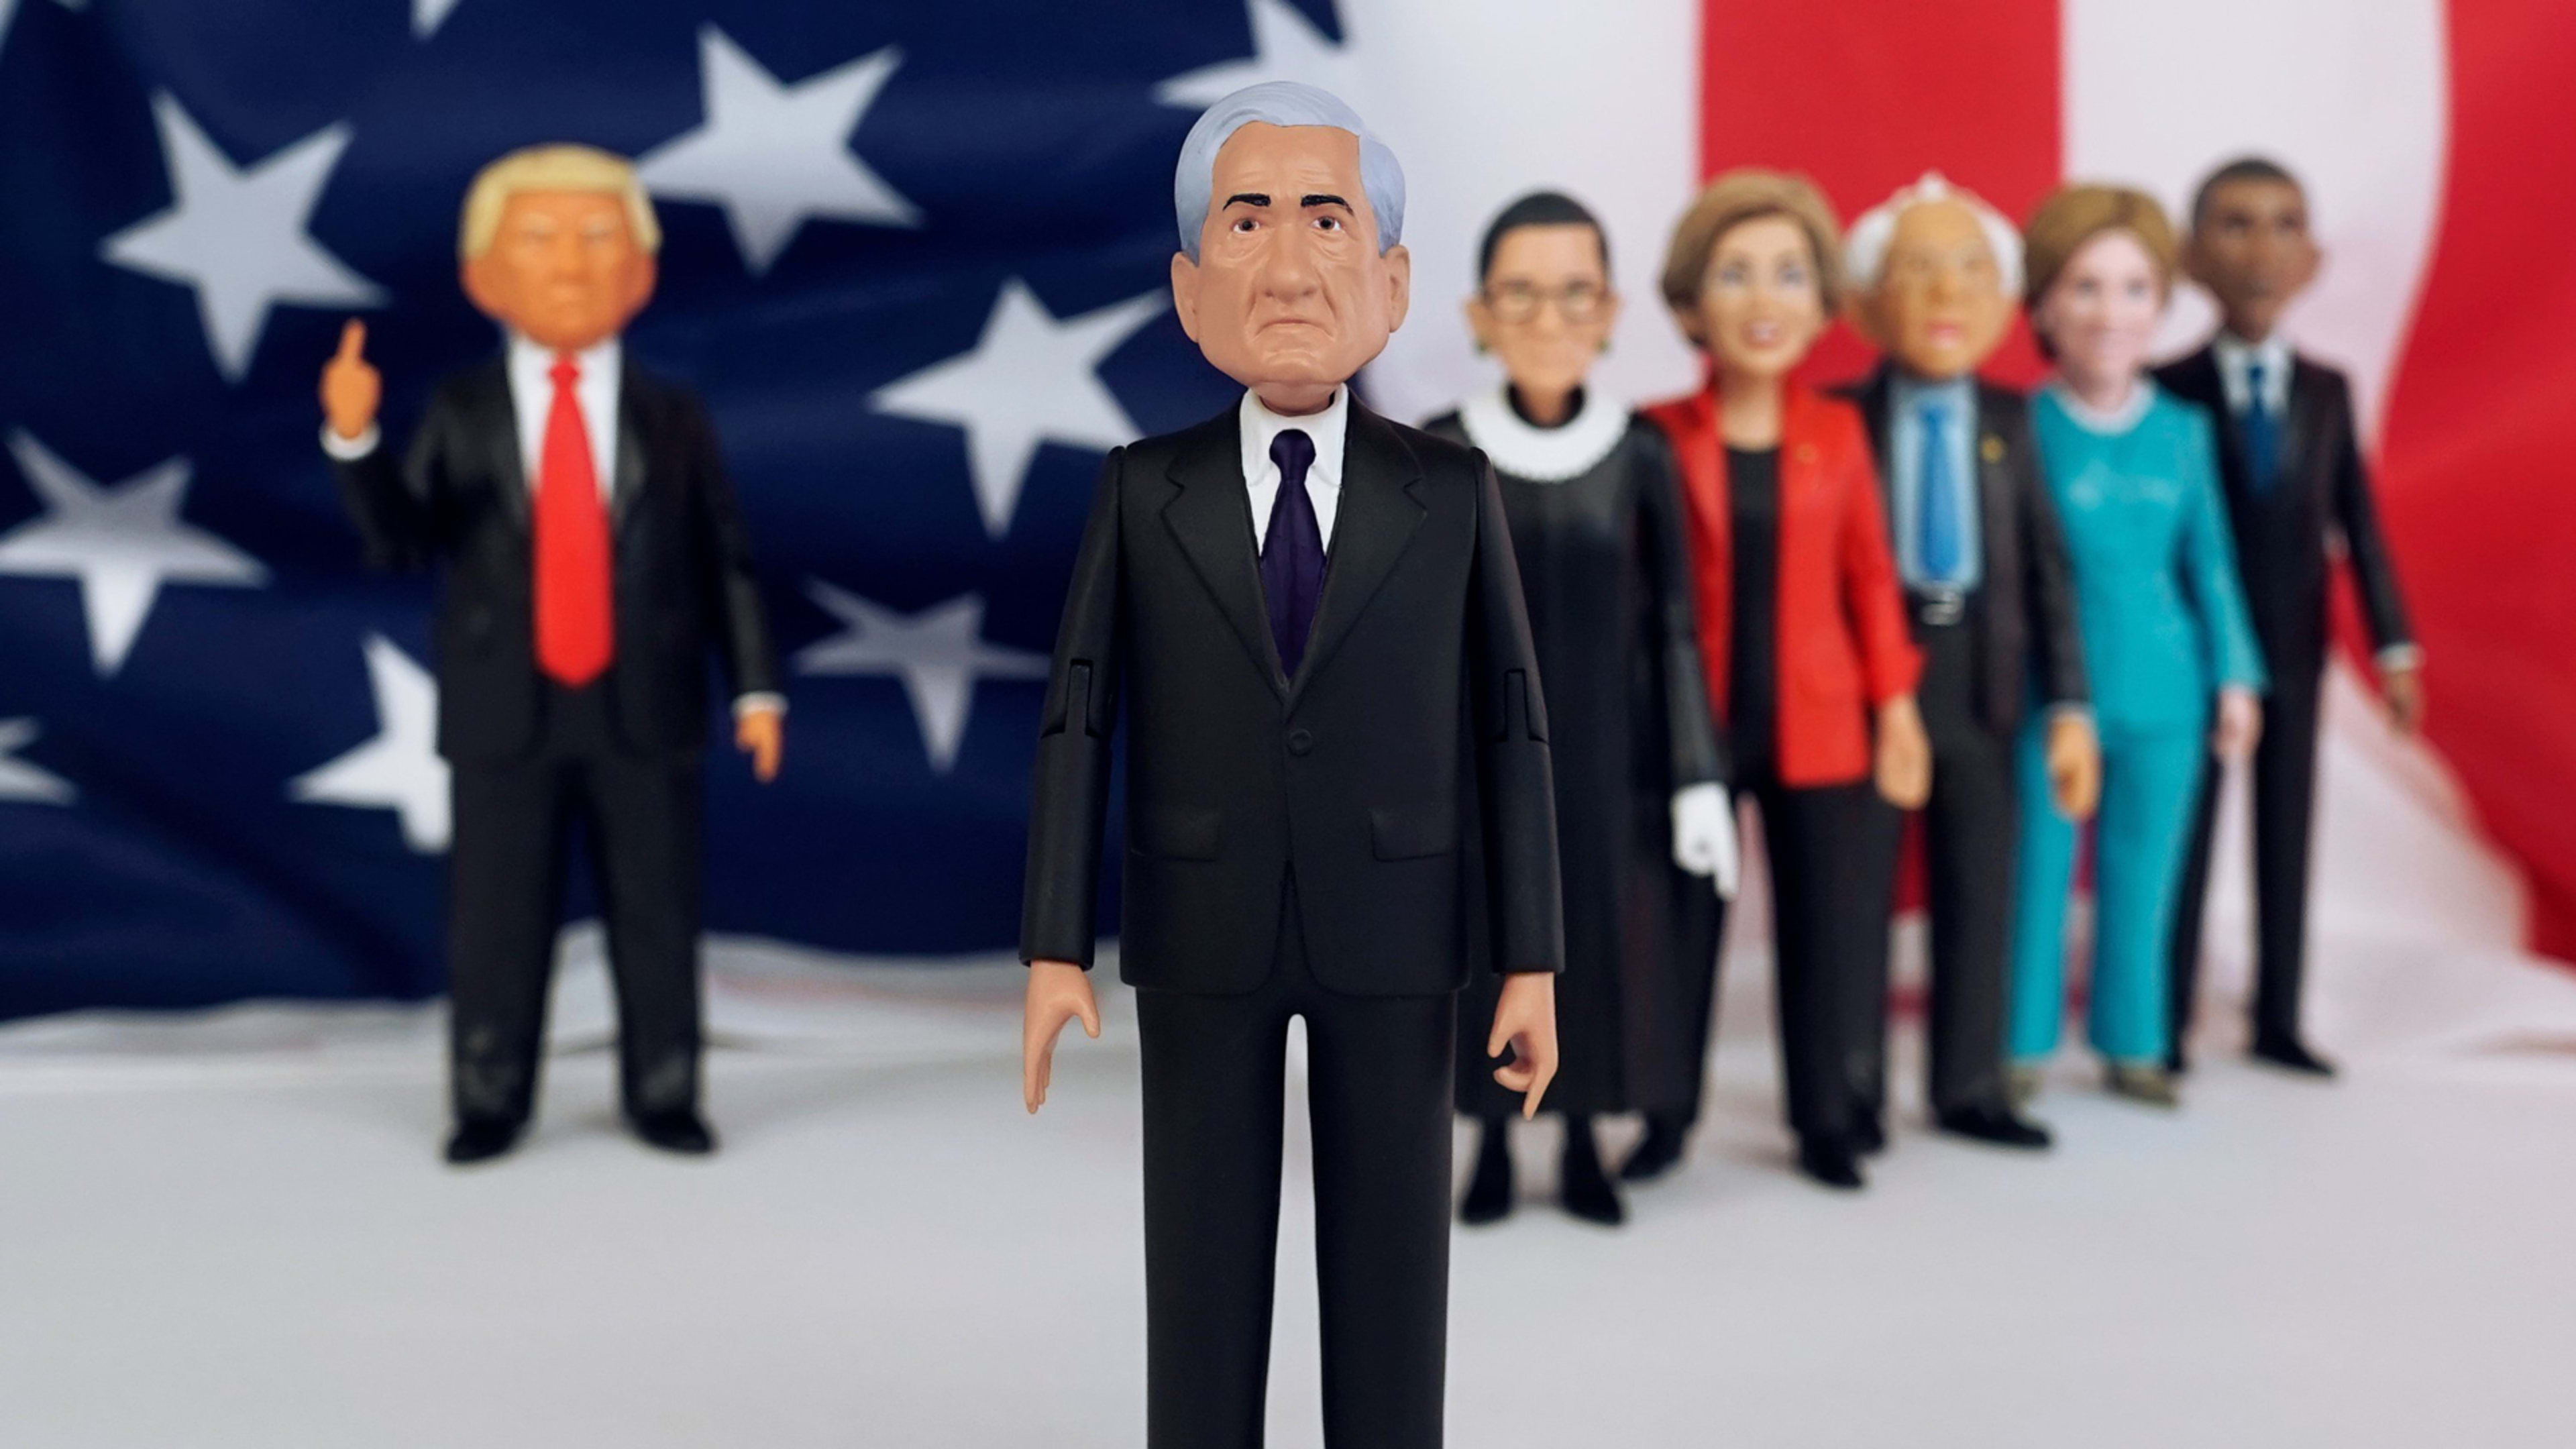 Here’s the Robert Mueller action figure you’ve been waiting for